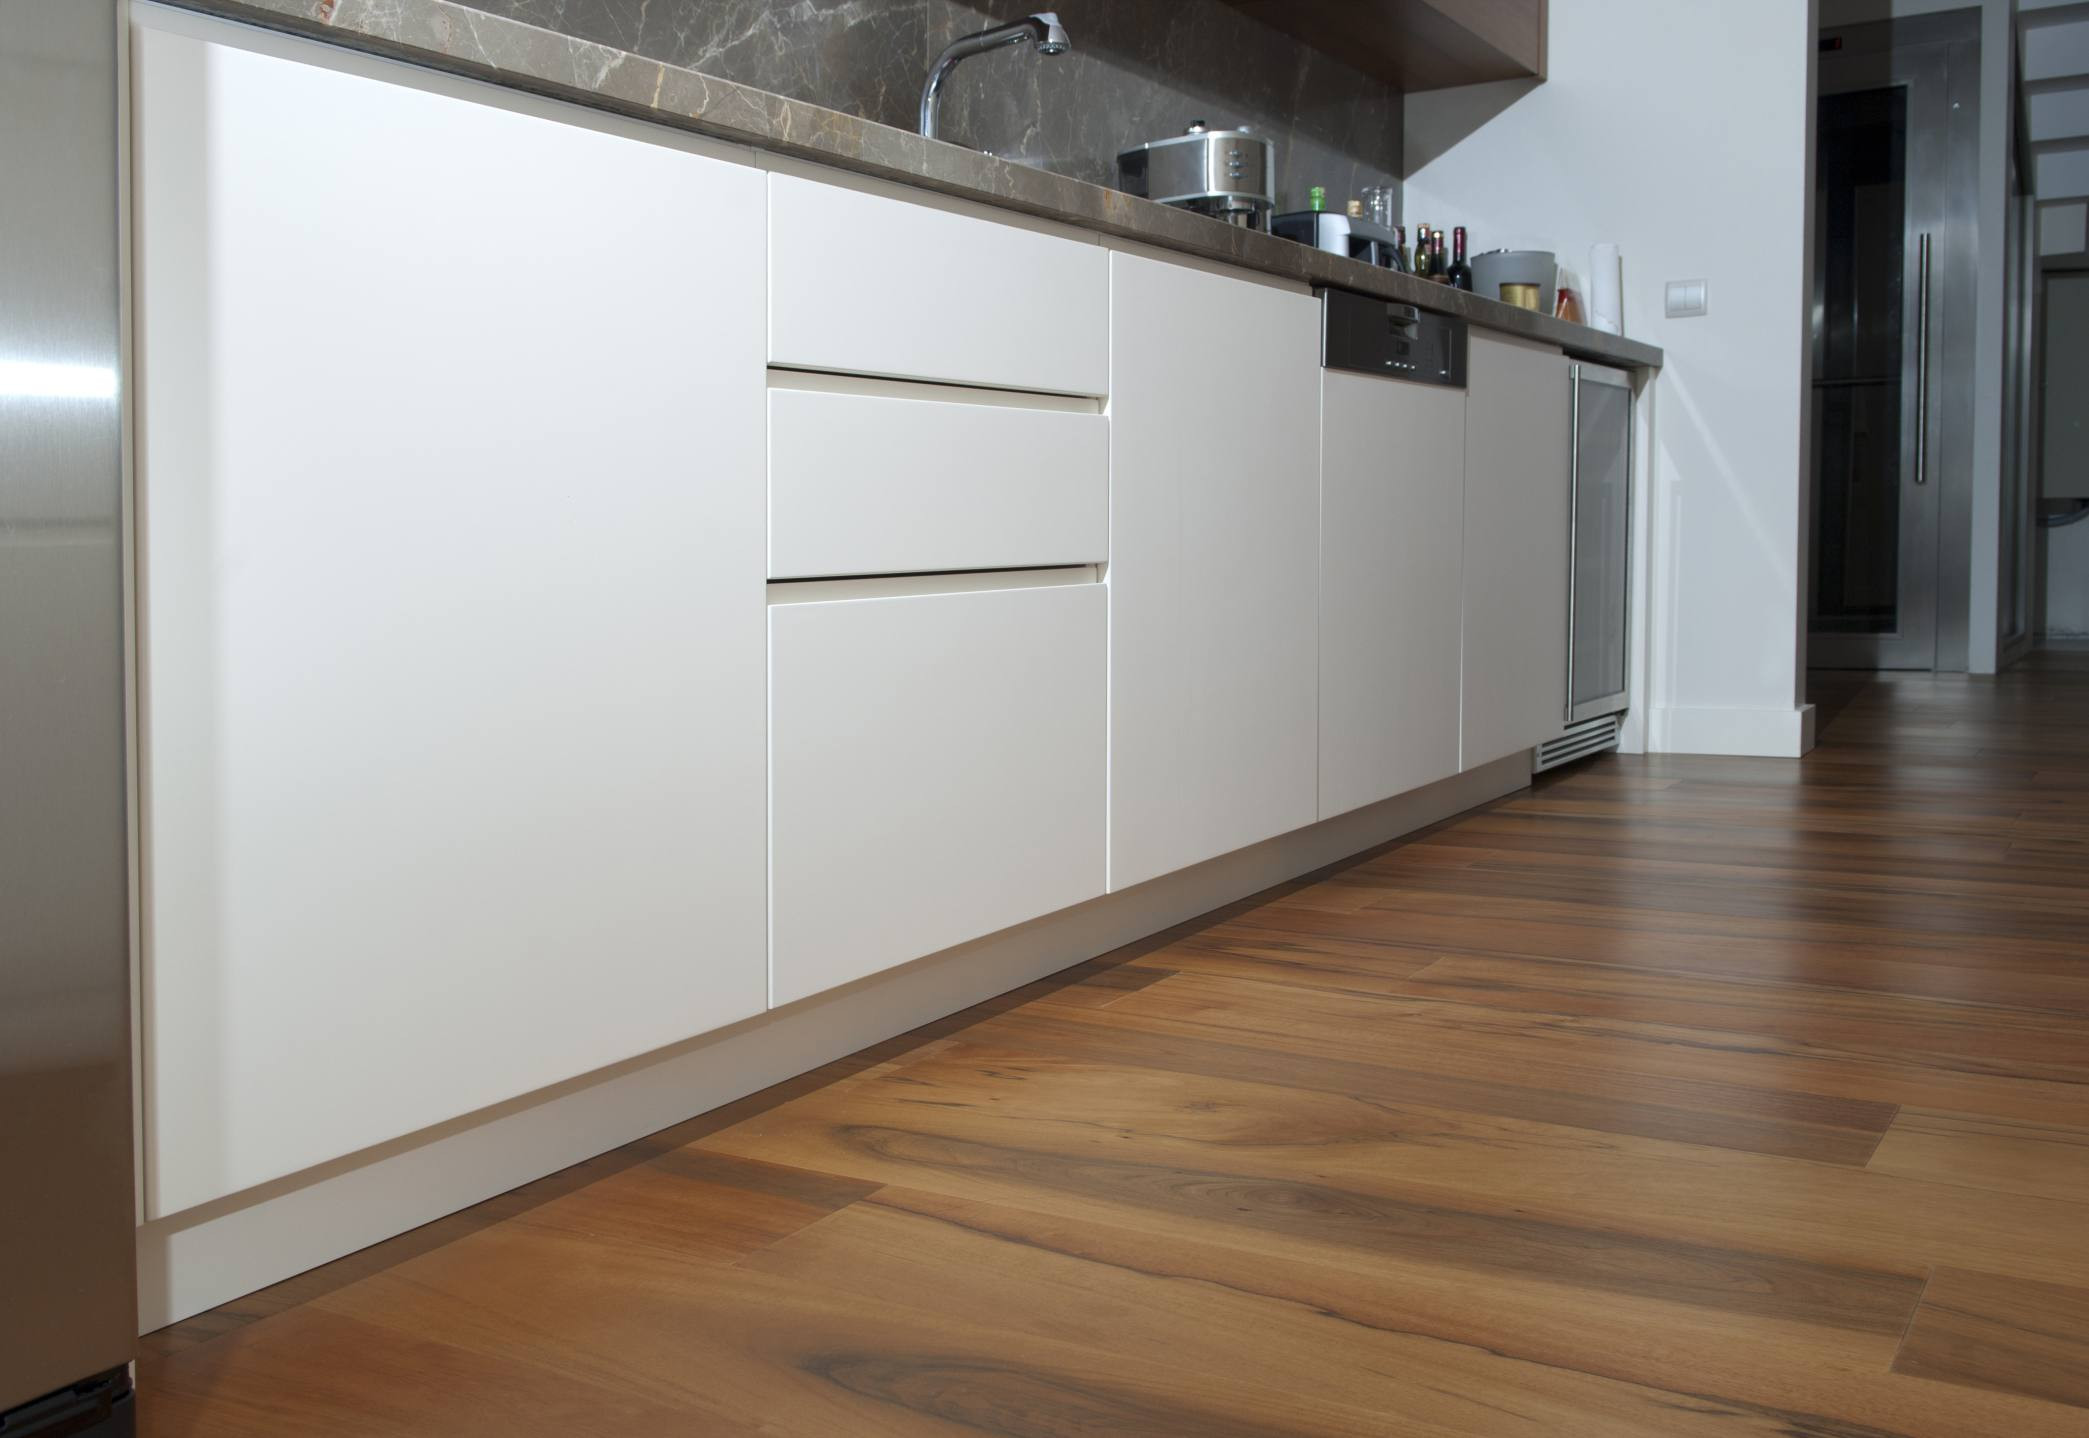 22 Fashionable Beech Hardwood Flooring Cost 2024 free download beech hardwood flooring cost of cheap laminate flooring reviews and buyers guide pertaining to laminate flooring in modern kitchen 182901991 56a4a09a3df78cf772835146